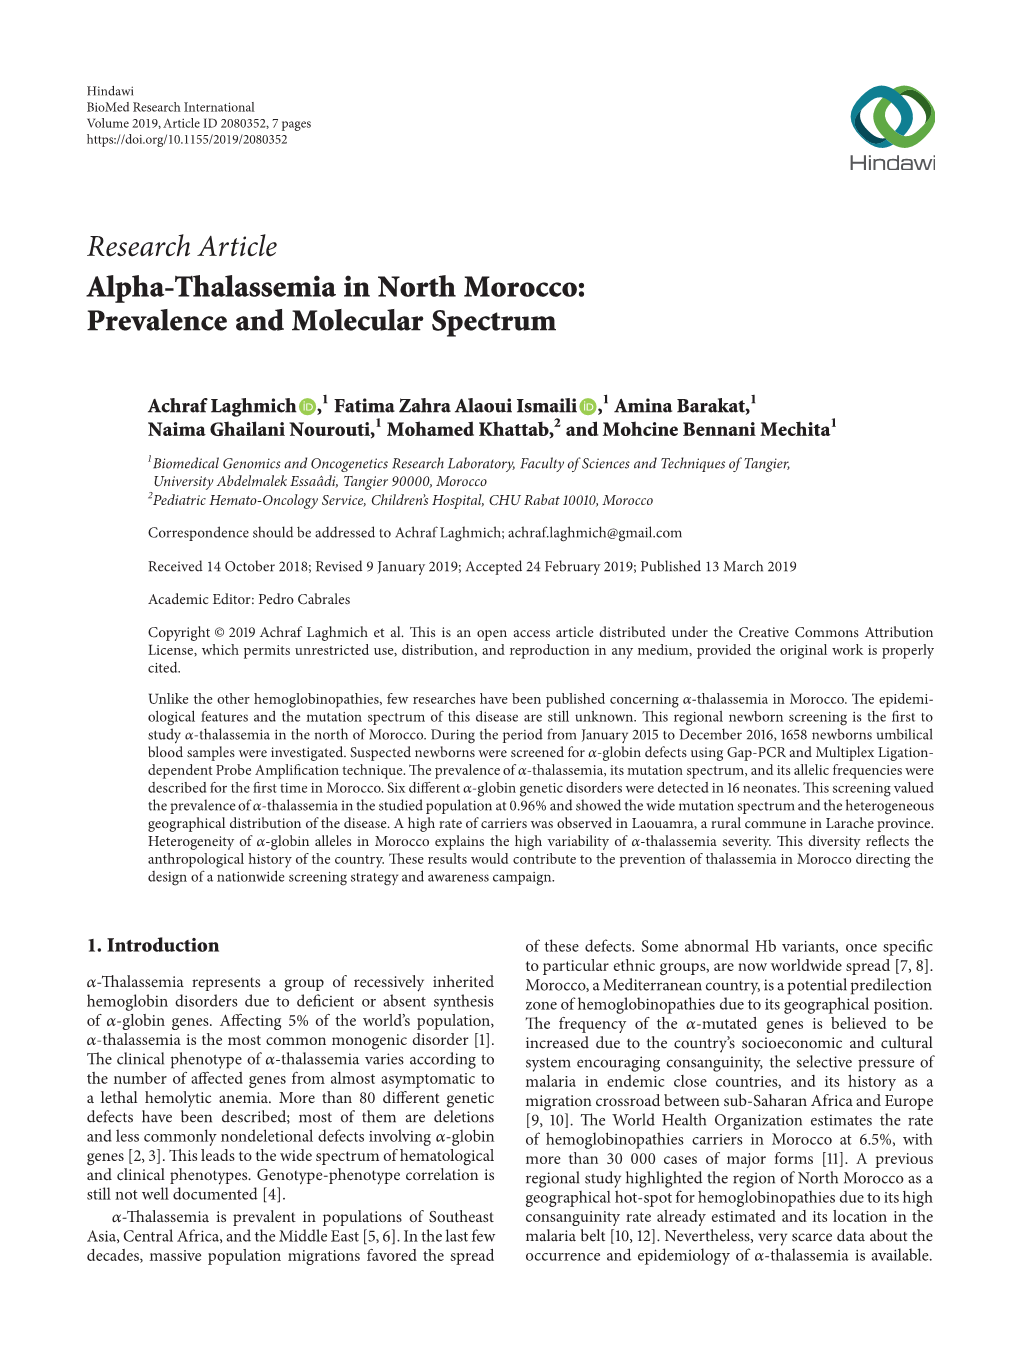 Research Article Alpha-Thalassemia in North Morocco: Prevalence and Molecular Spectrum